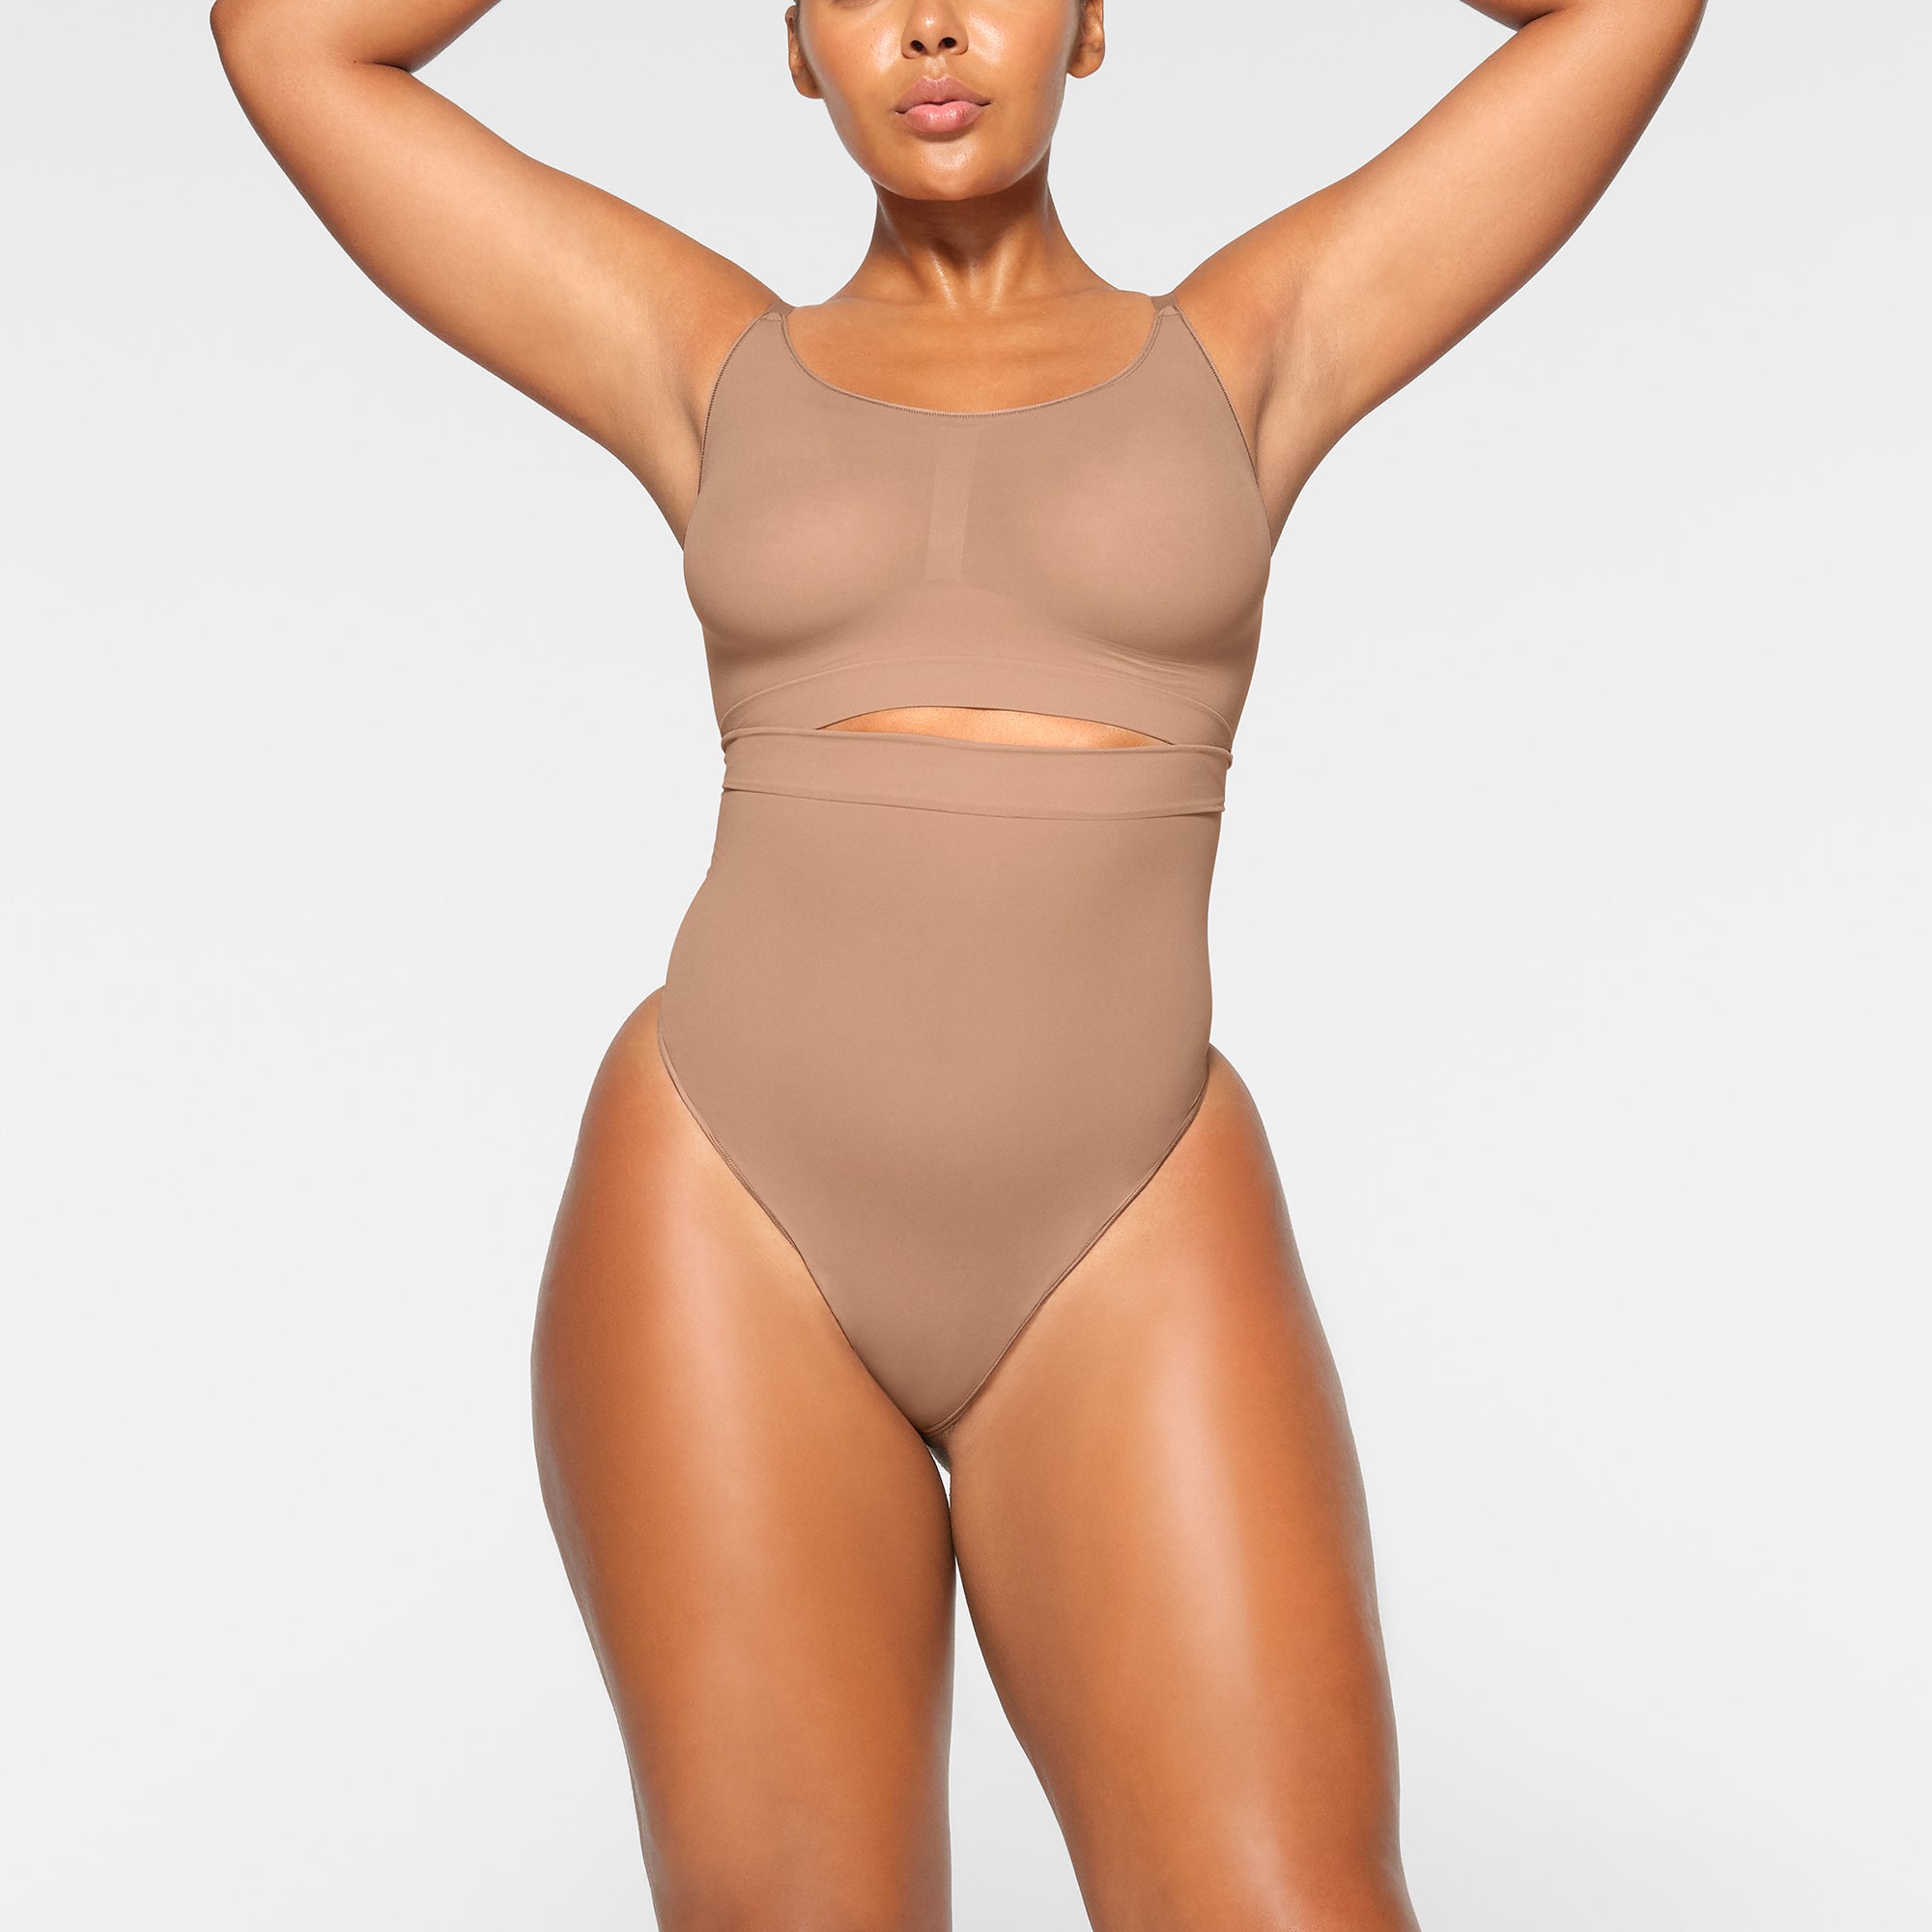 Hause of J'mone's High Waist Thong Body Shaper - Smooth and Sculpt Your  Silhouette